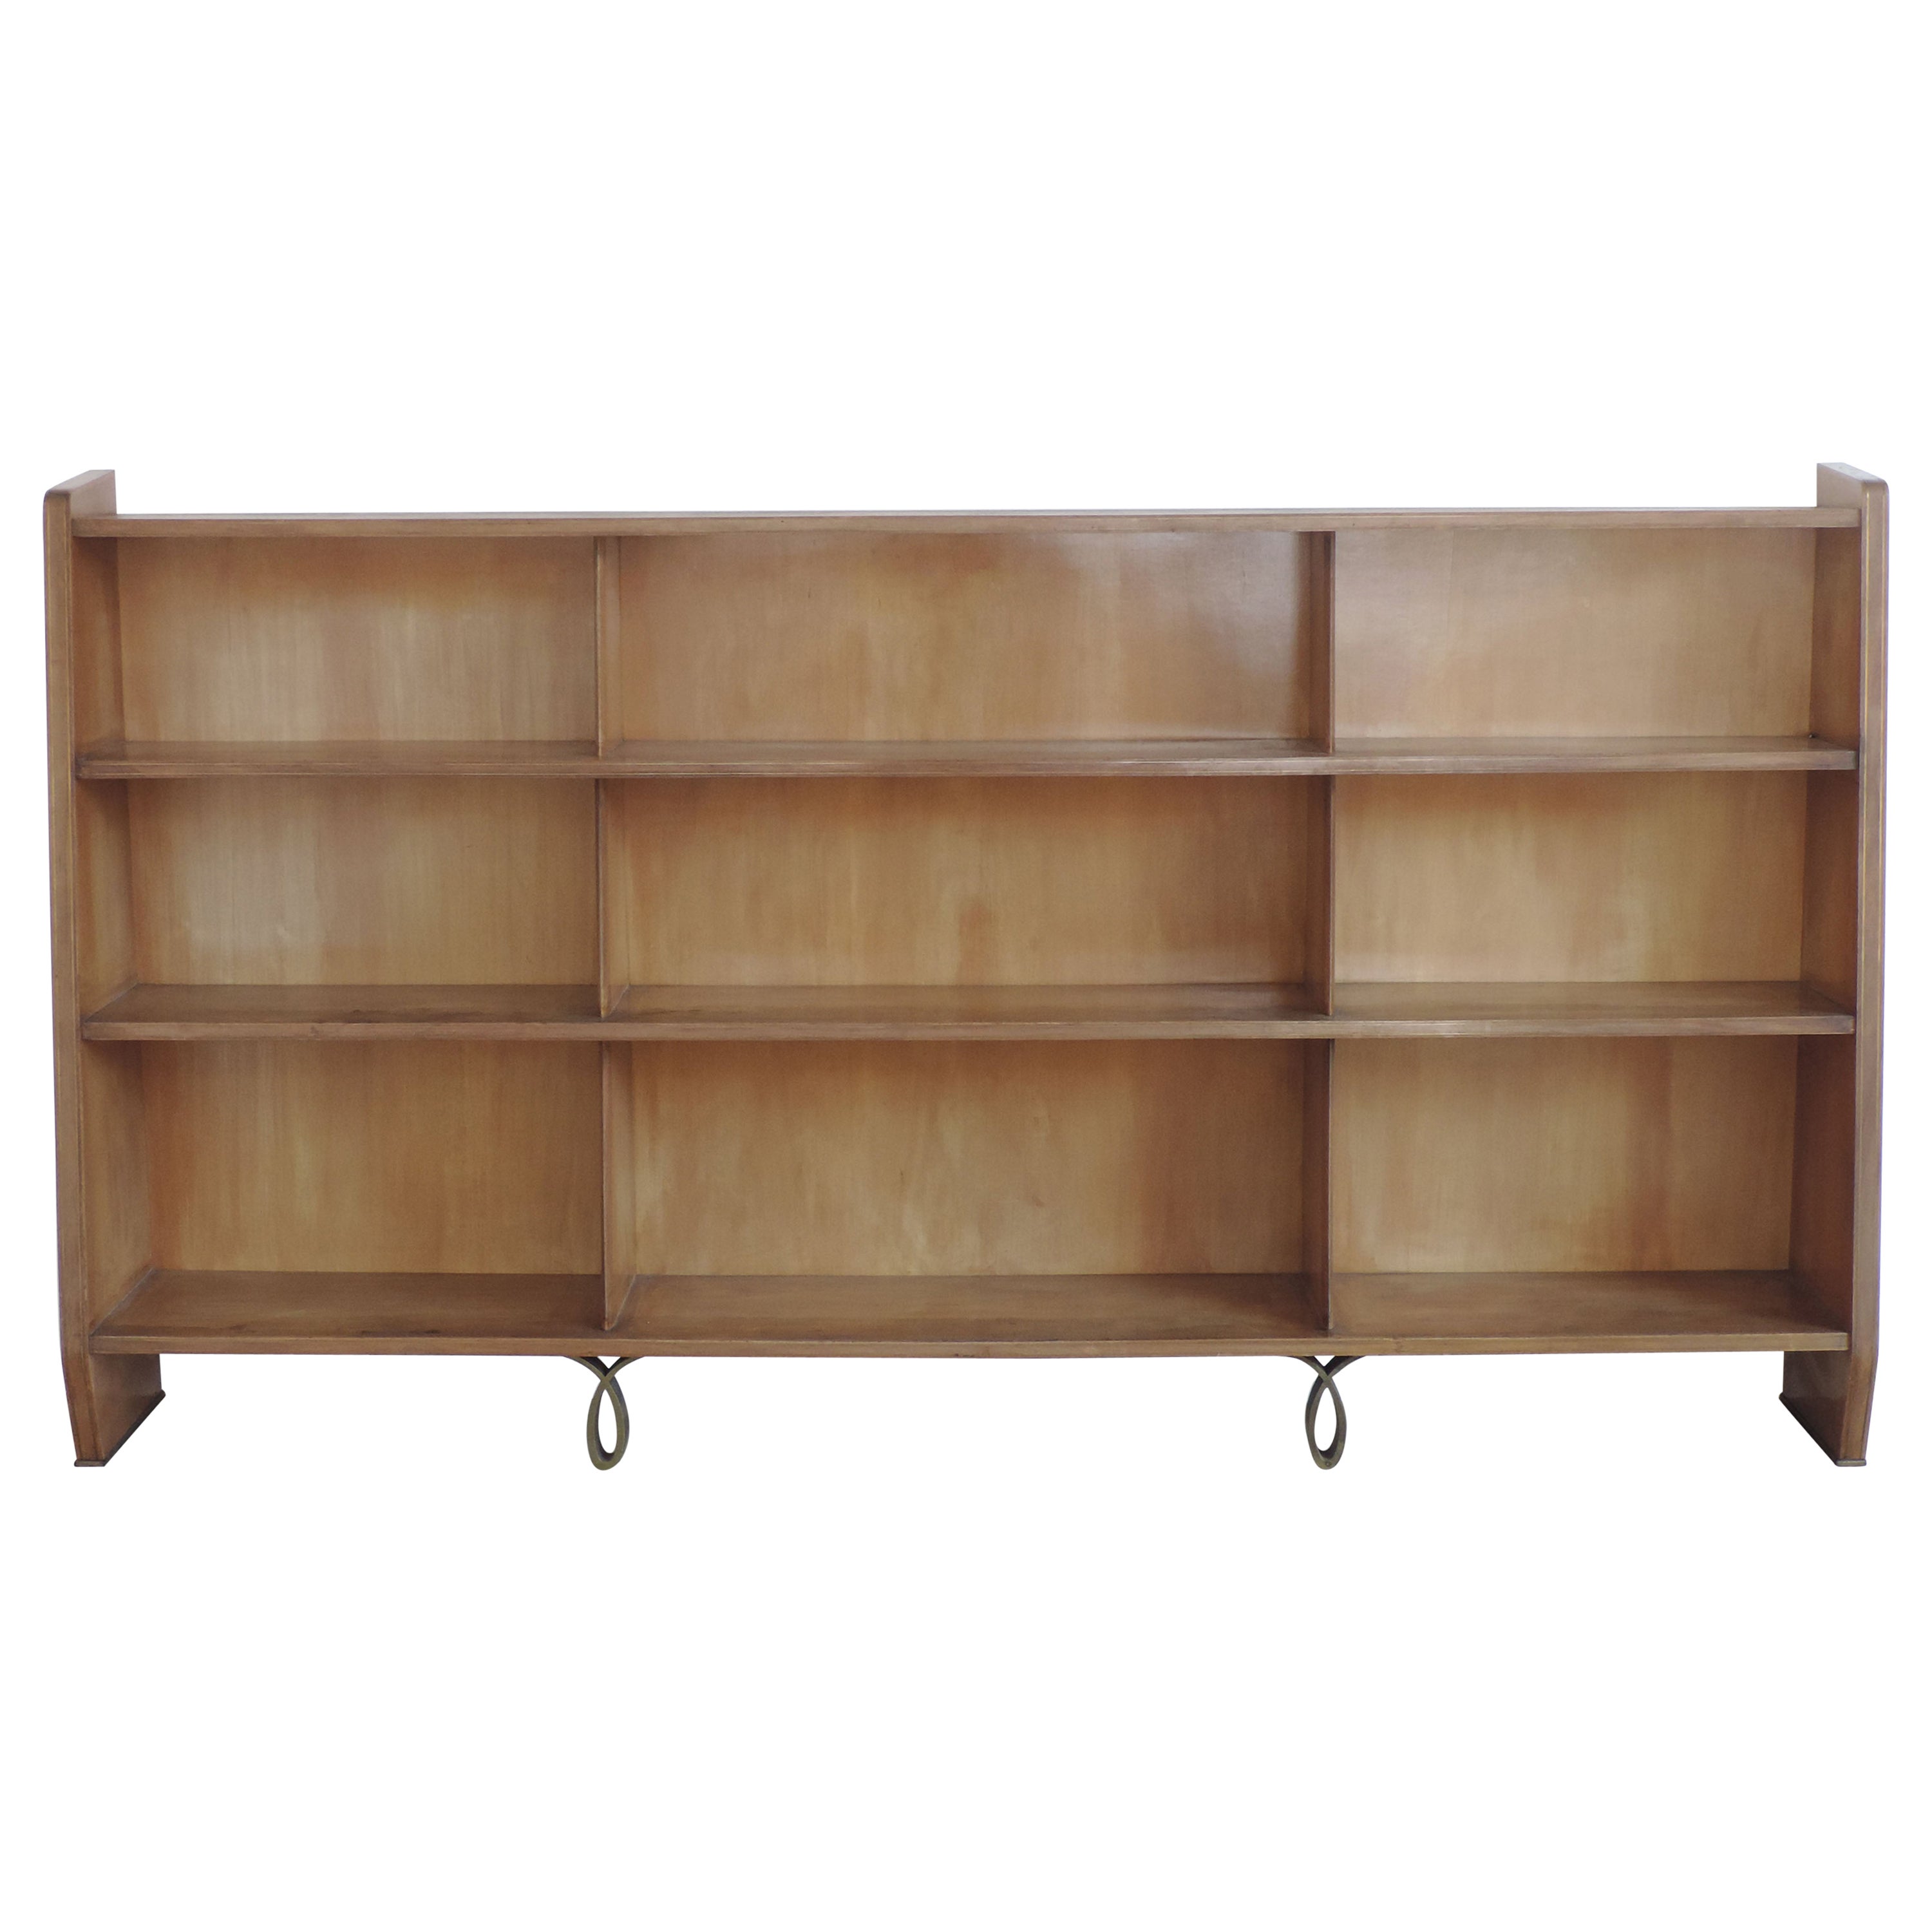 Italian Art Deco Book Case in Wood, Nickel and Brass, 1930s For Sale